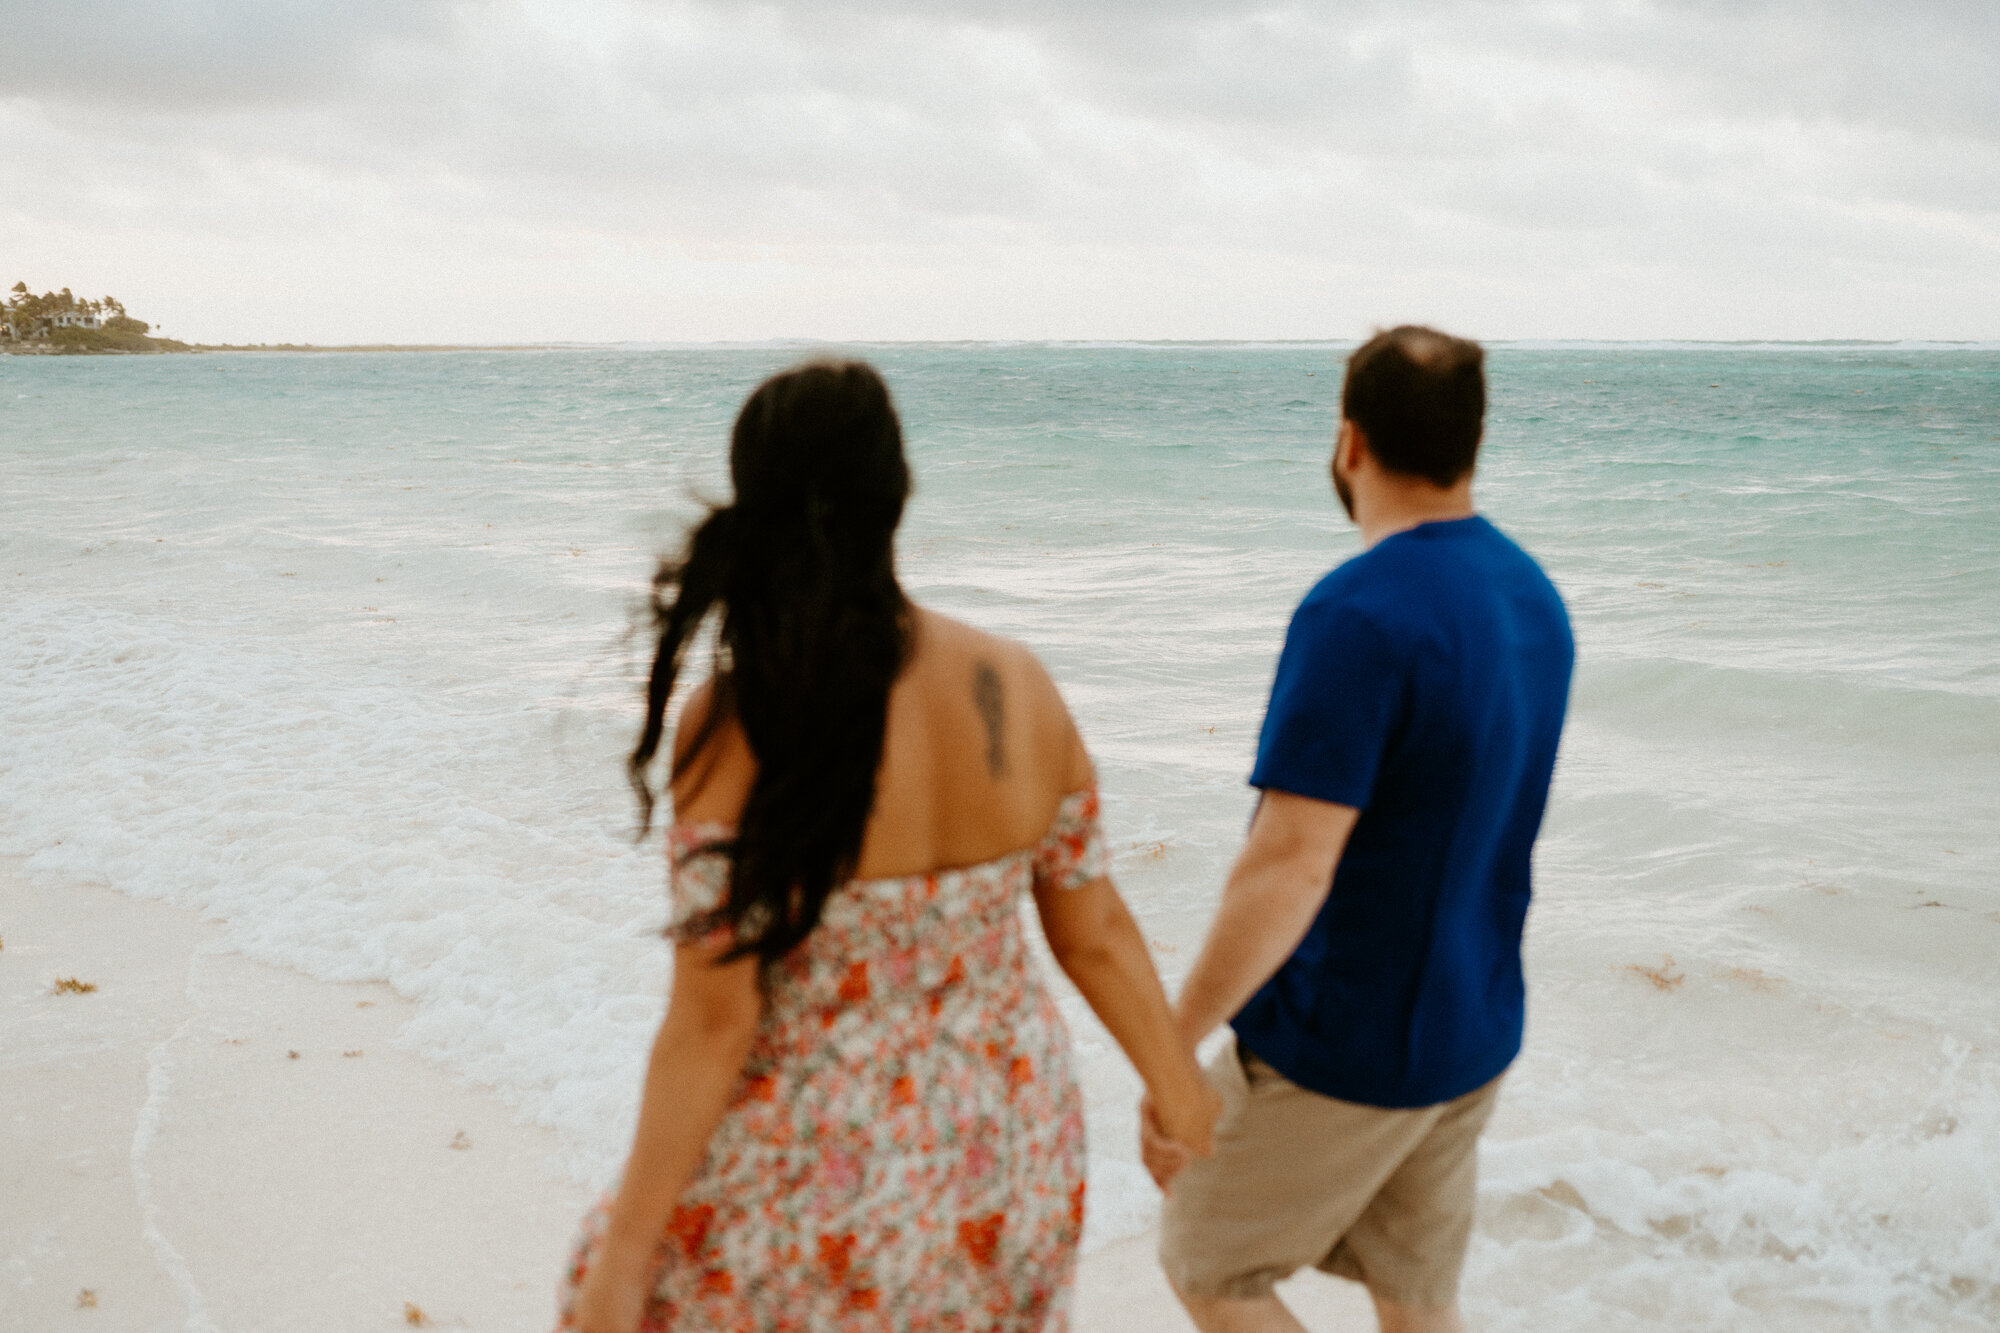 holding hands on the beach in riviera maya mexico